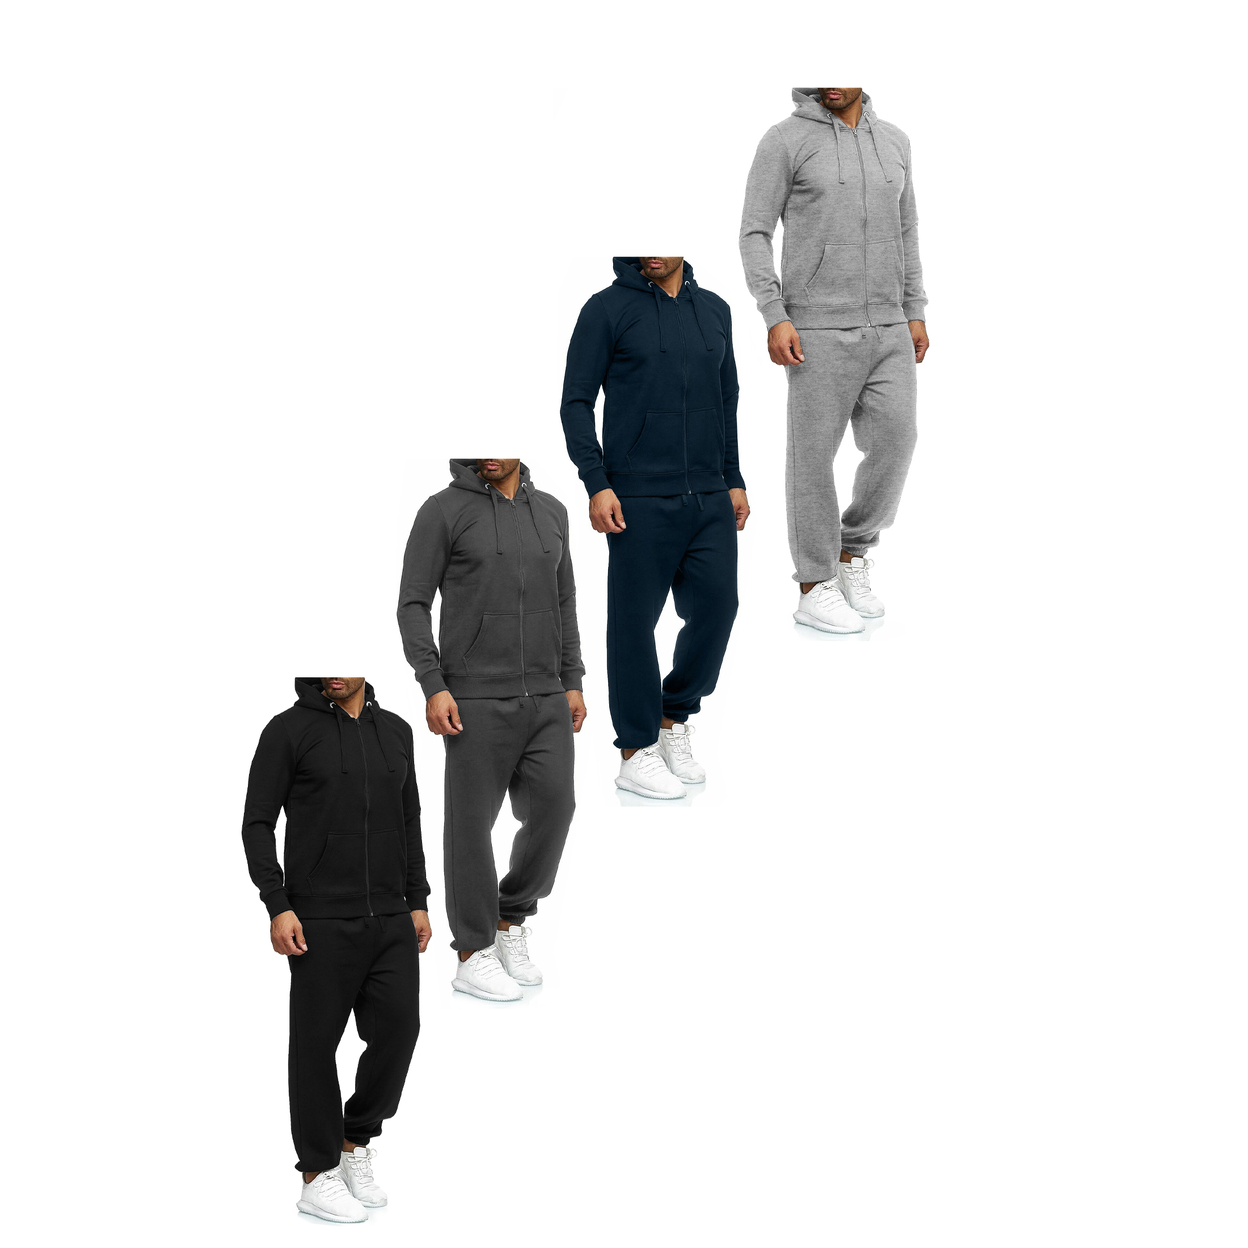 Multi-Pack: Men's Casual Big & Tall Athletic Active Winter Warm Fleece Lined Full Zip Tracksuit Jogger Set - Navy, 1-pack, X-large